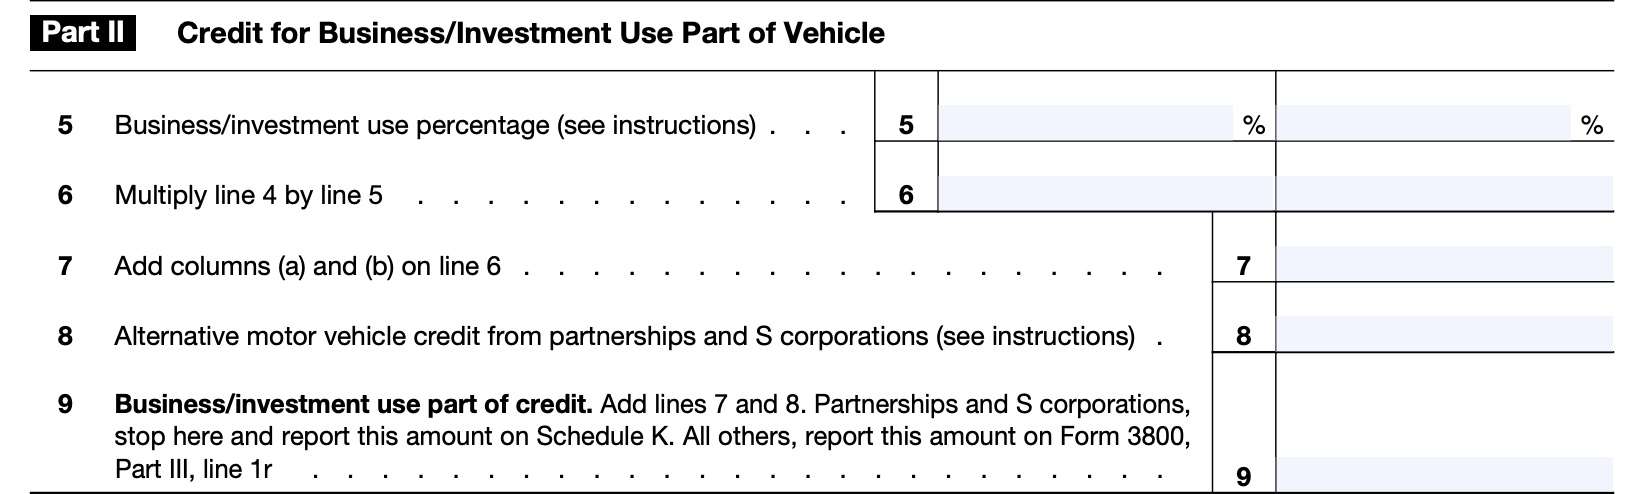 part ii: credit for business/investment use part of vehicle